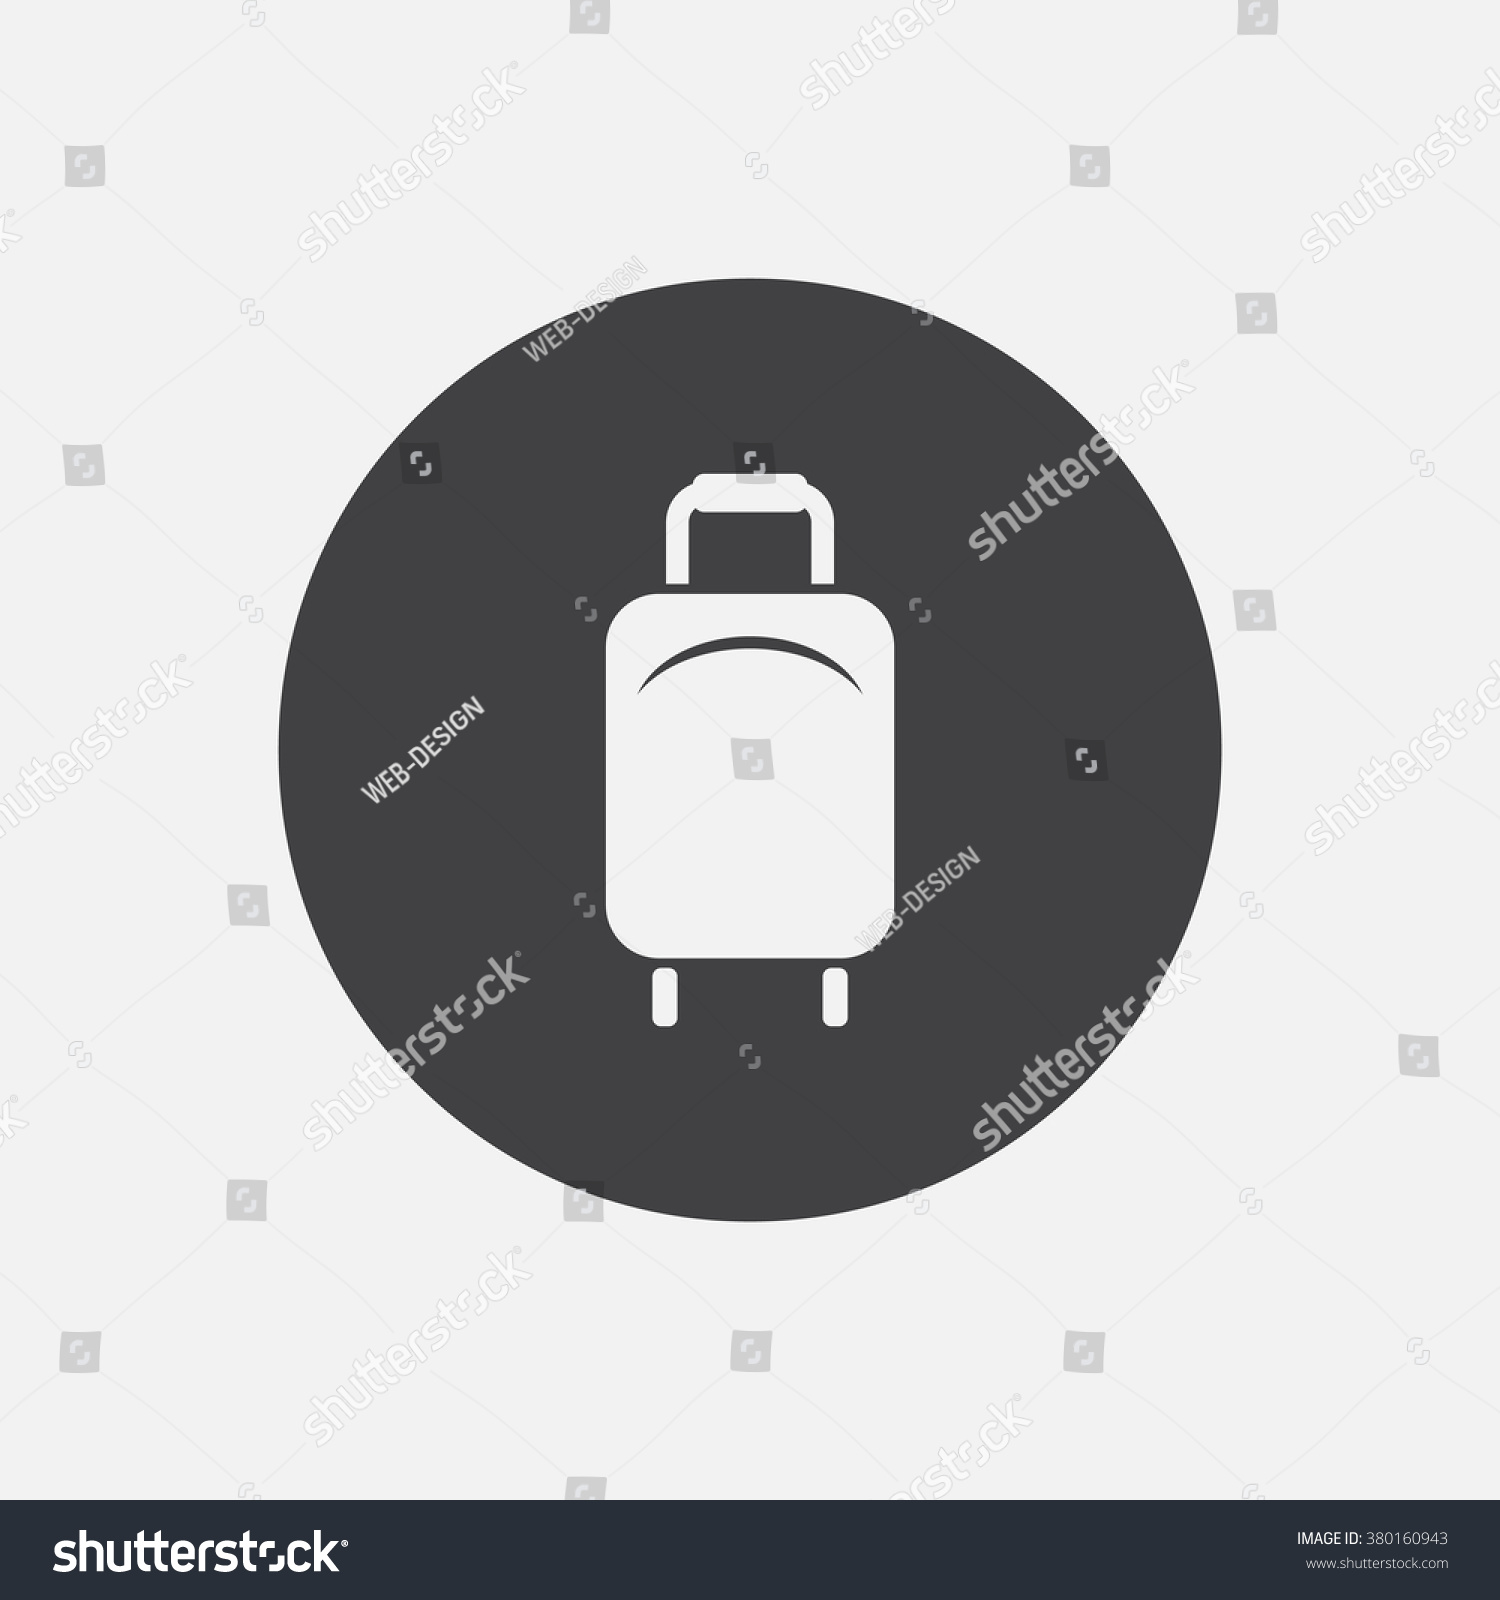 Baggage Icon Jpg, Baggage Icon Graphic, Baggage Icon Picture, Baggage